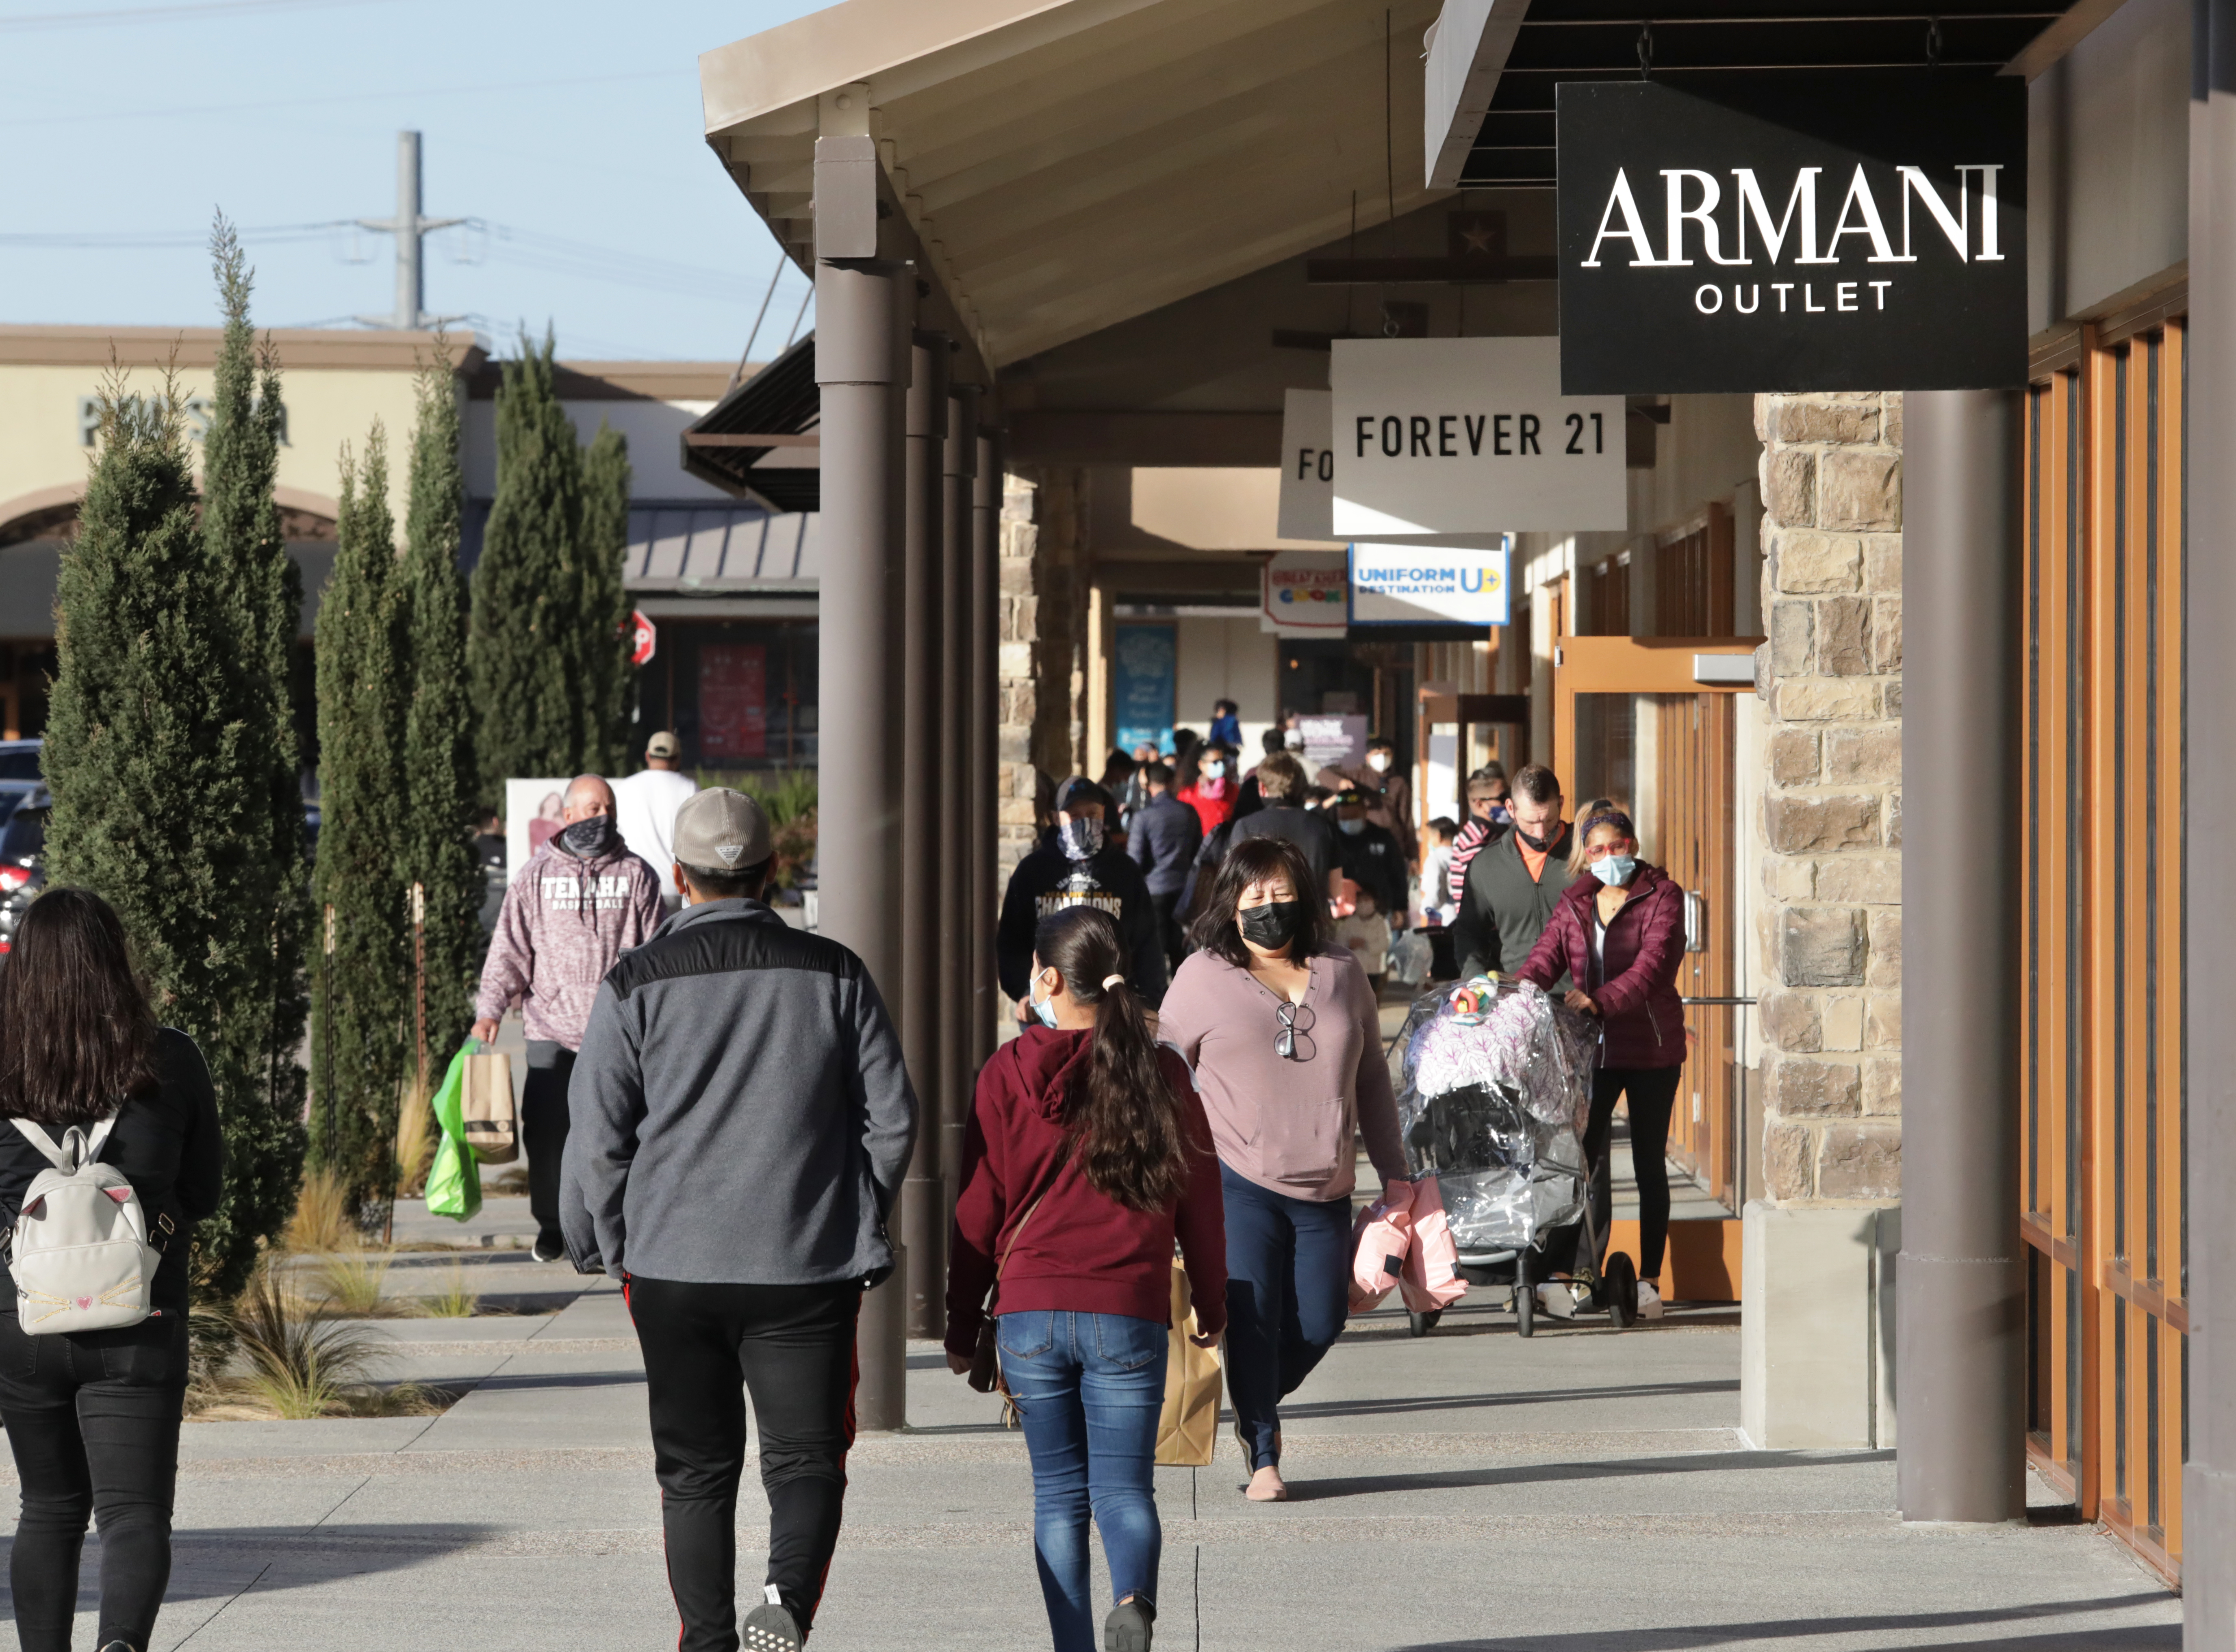 Allen mall will celebrate National Outlet Shopping Day with promotions this  weekend